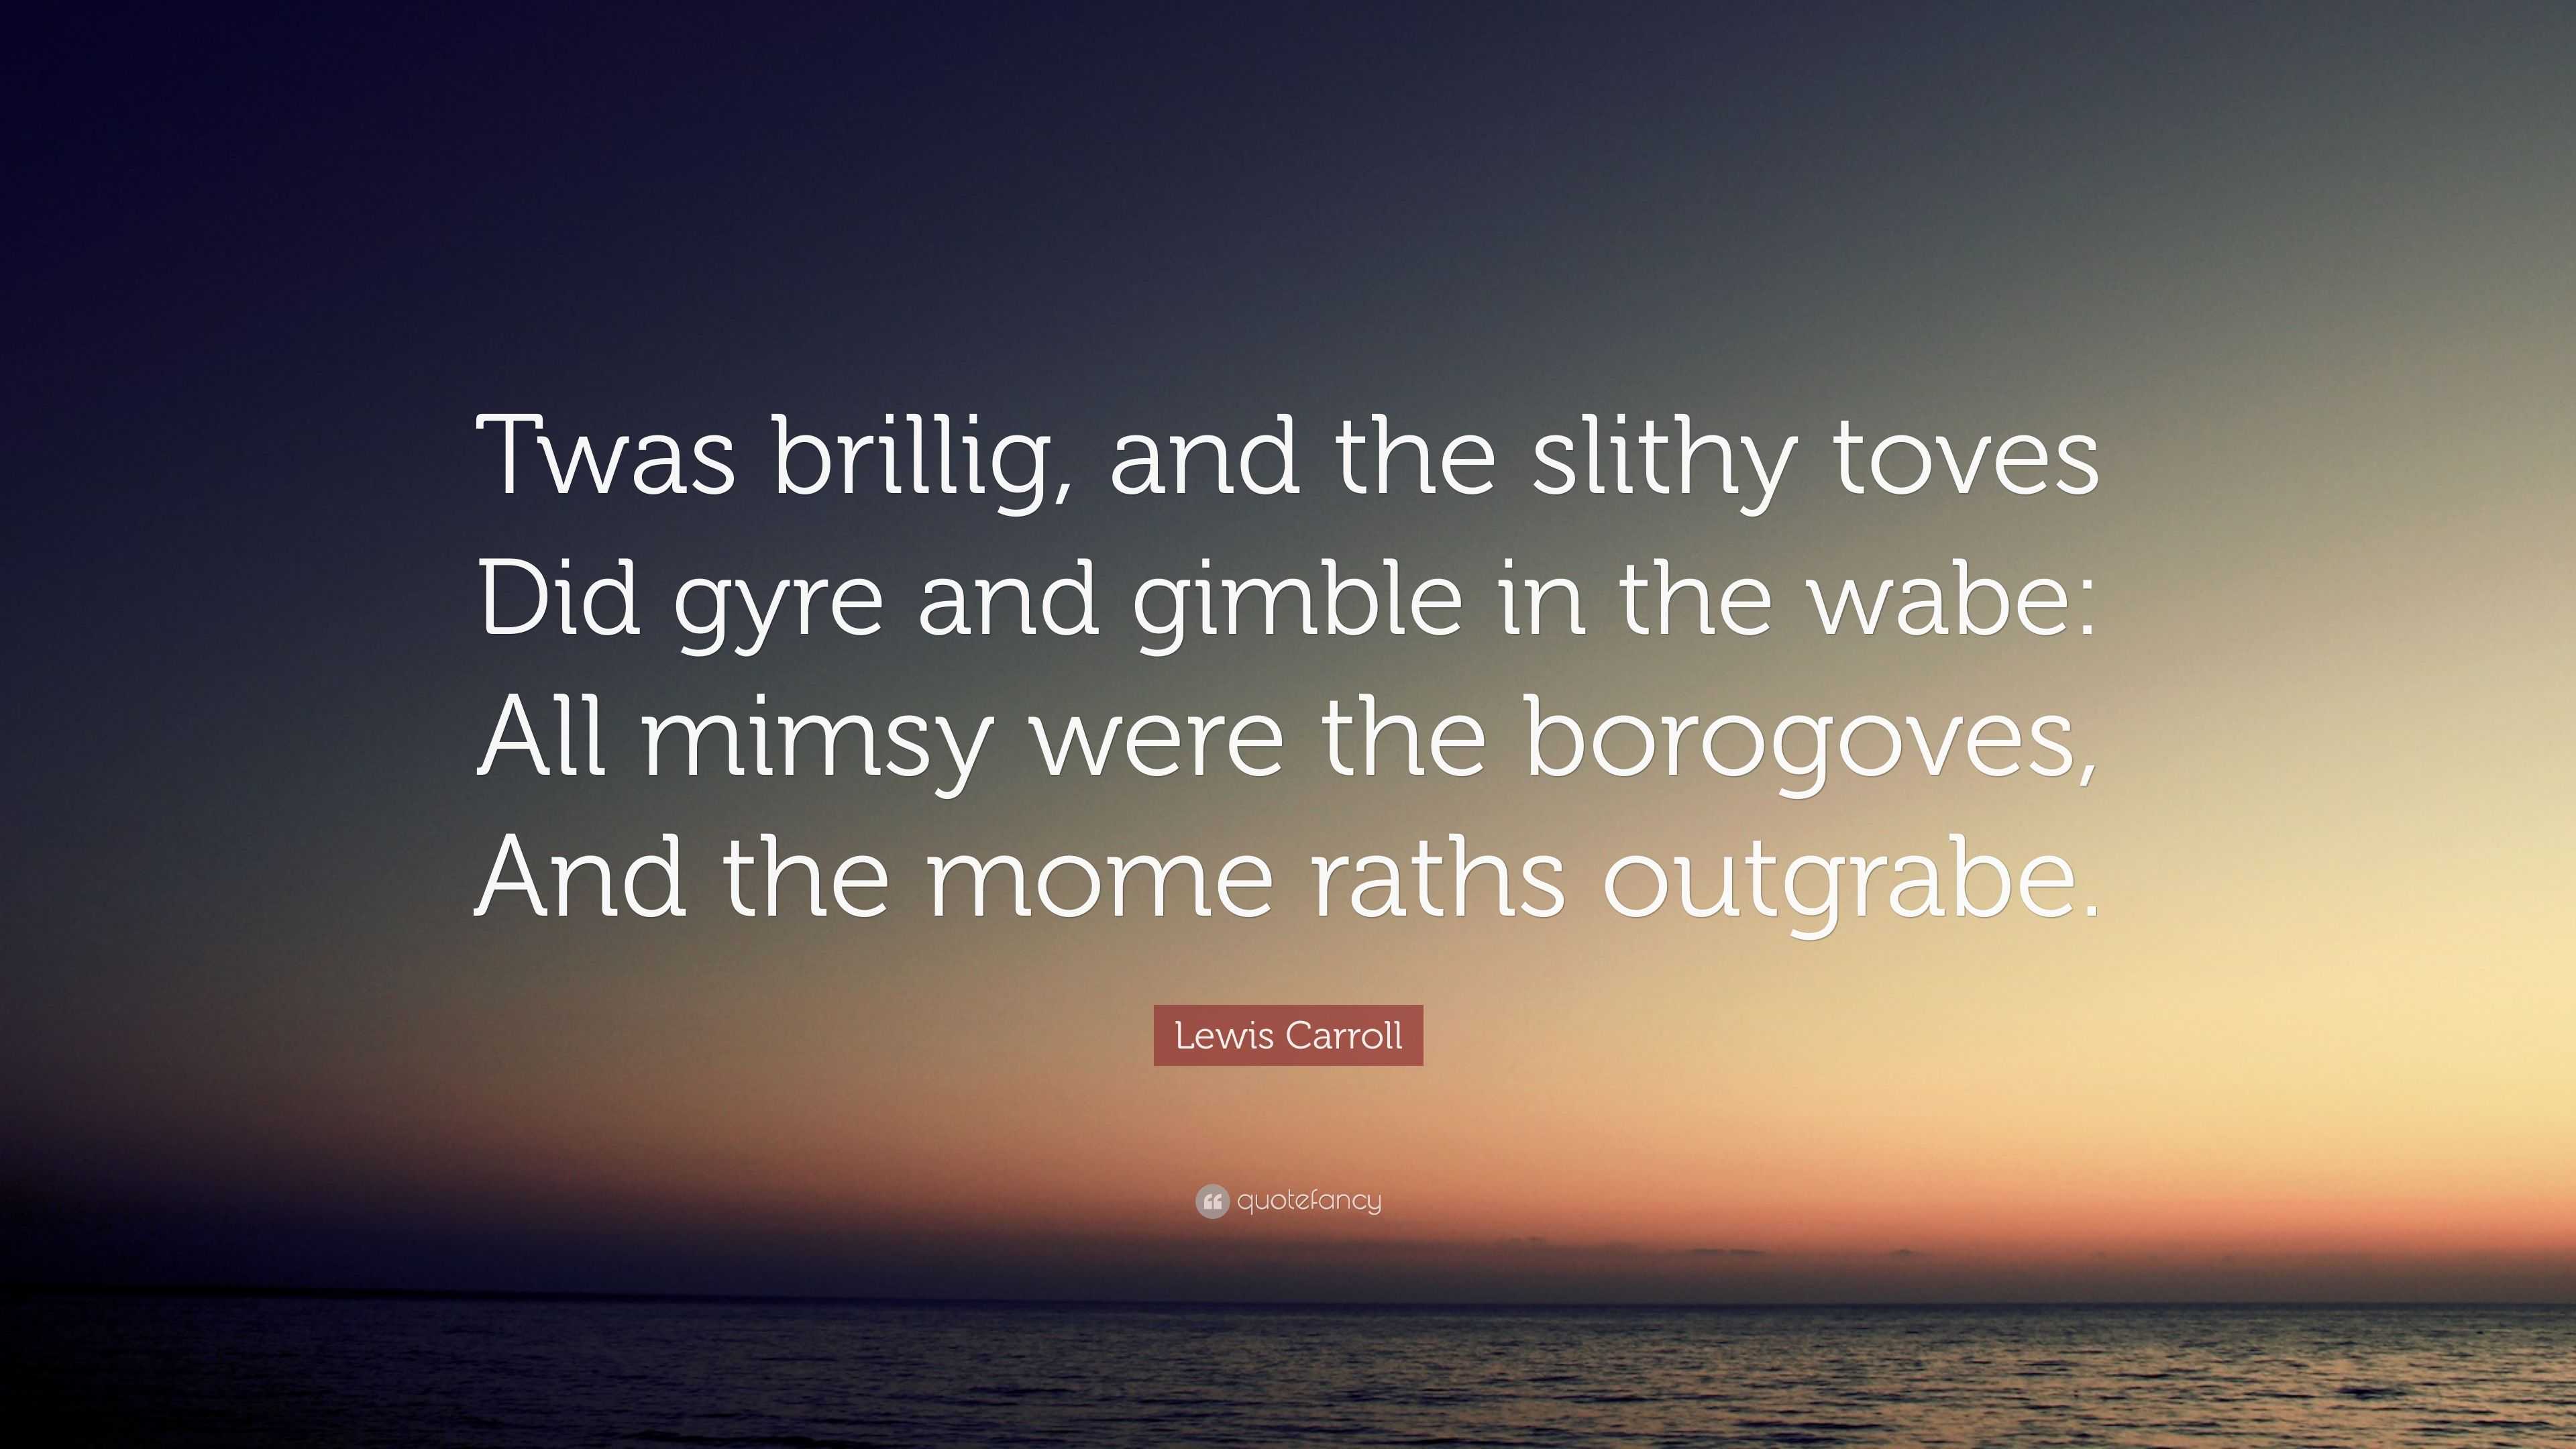 Lewis Carroll Quote: "Twas brillig, and the slithy toves Did gyre and gimble in the wabe: All ...